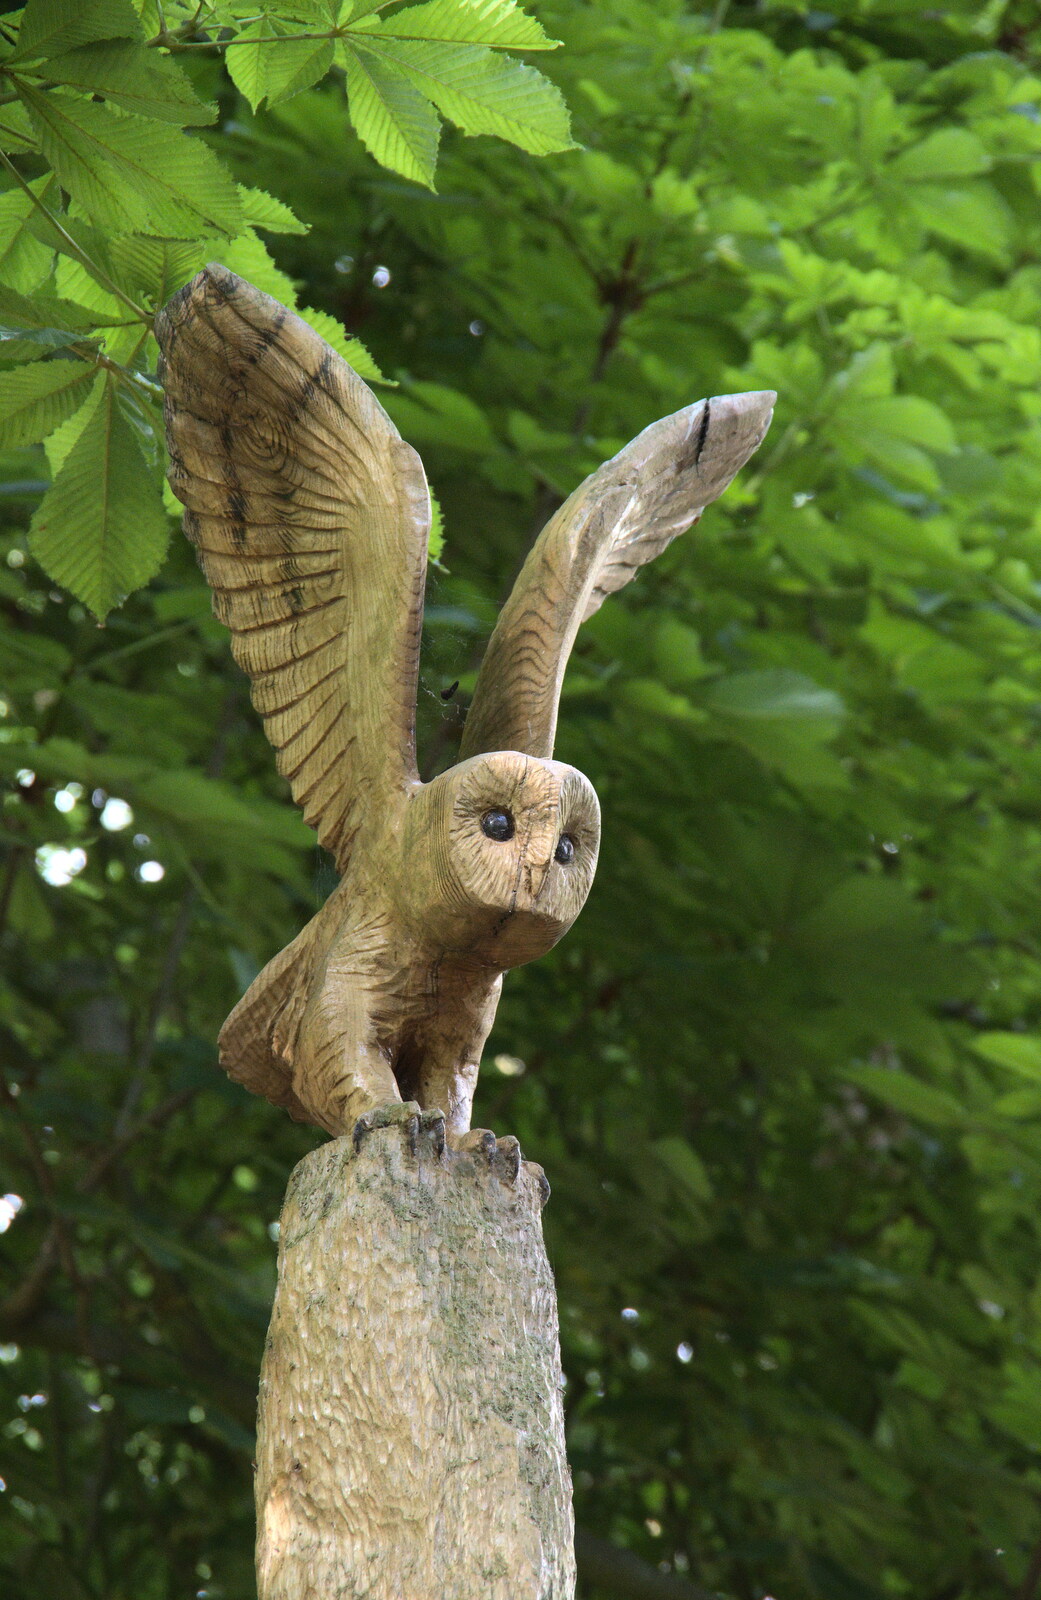 A cool carved owl in the woods from A Moth Infestation and a Trip to the Zoo, Banham, Norfolk - 21st May 2022